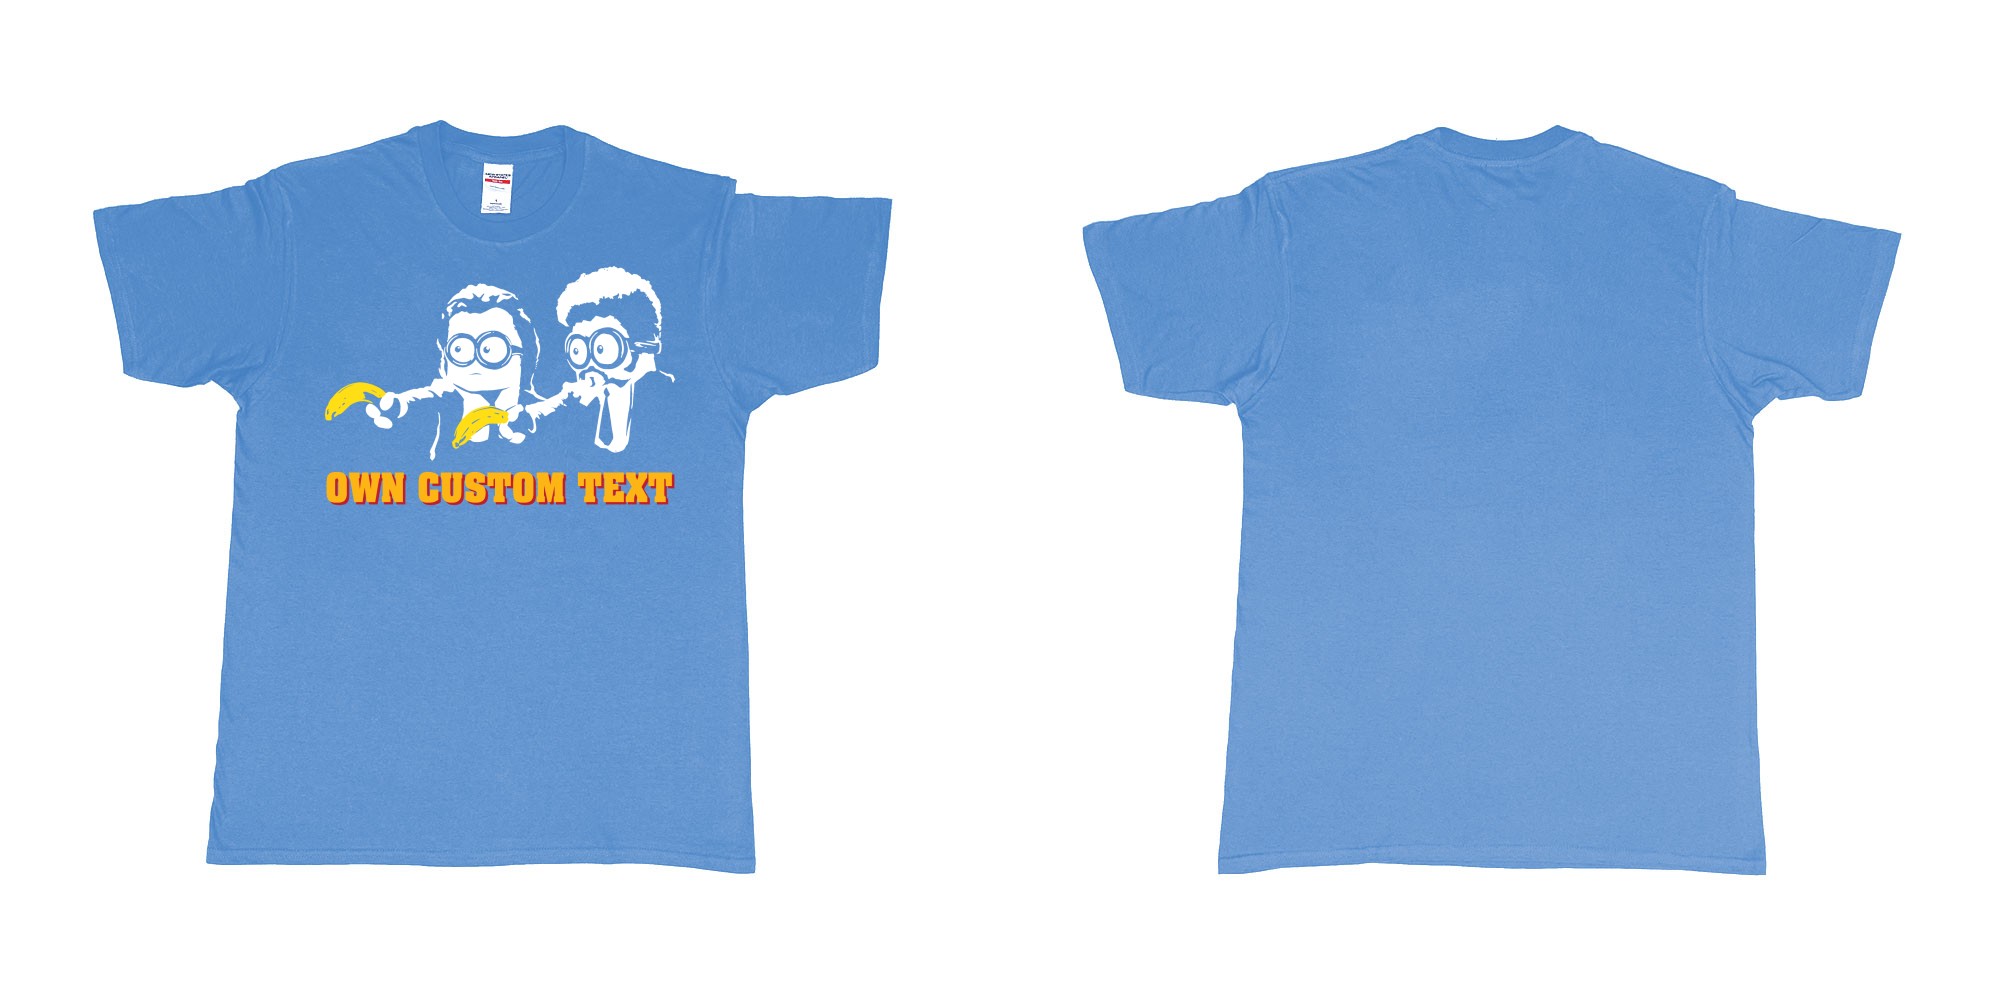 Custom tshirt design minions pulp fiction in fabric color carolina-blue choice your own text made in Bali by The Pirate Way